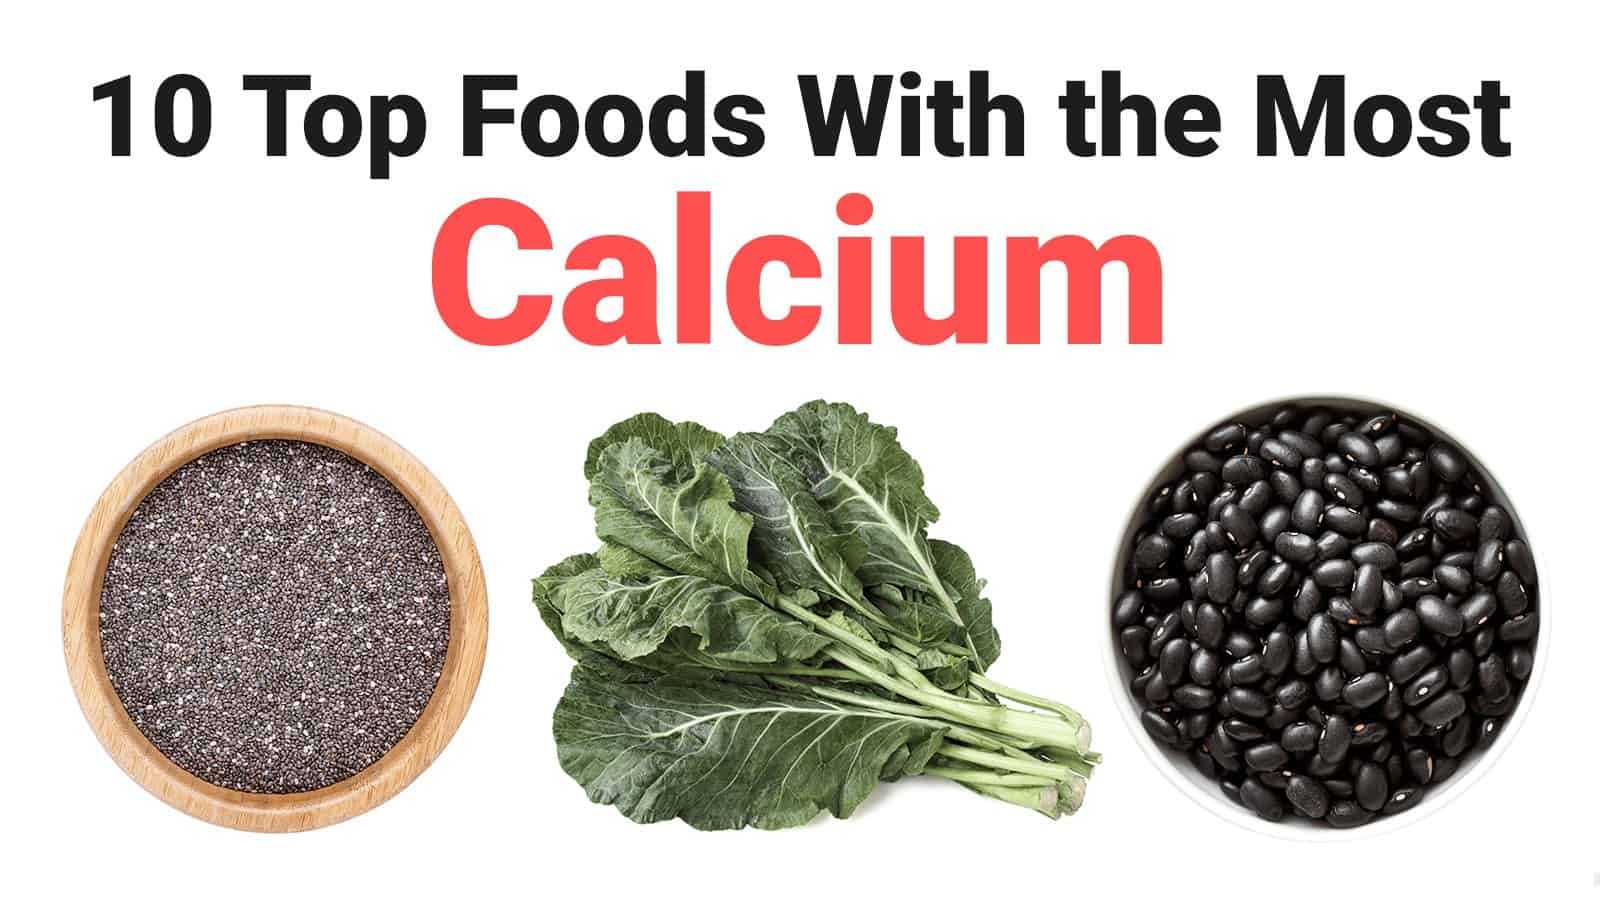 10 Top Foods With the Most Calcium